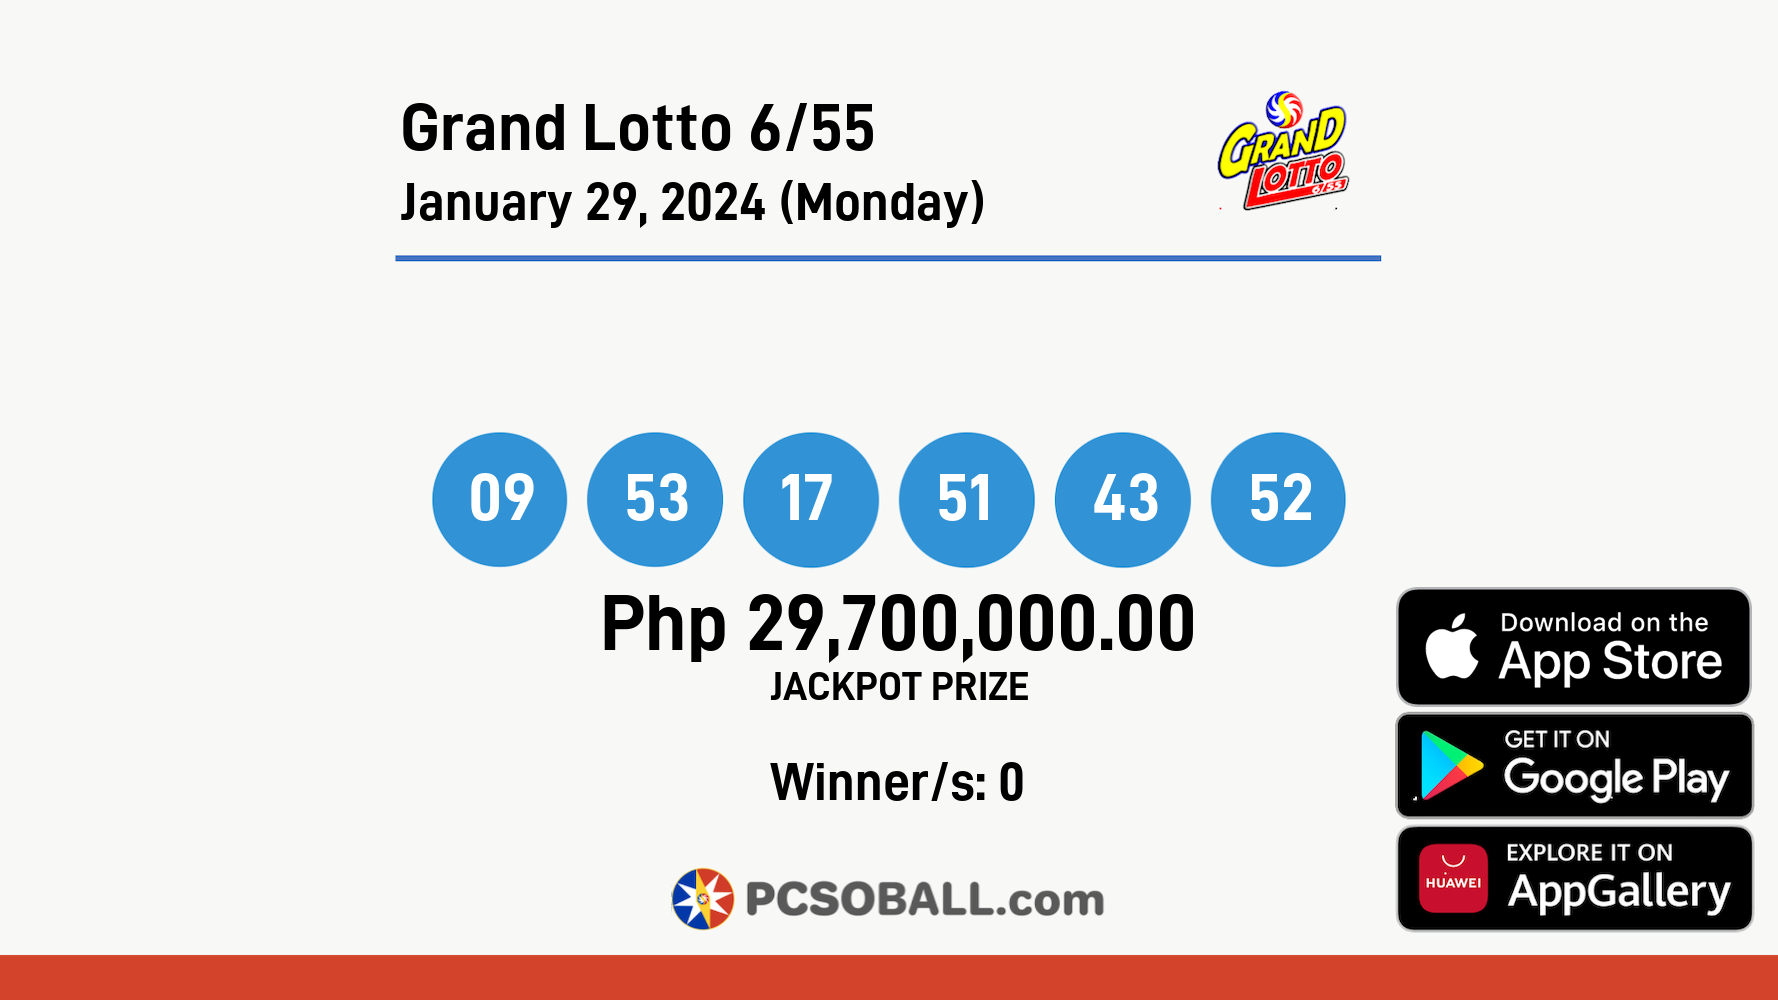 Grand Lotto 6/55 January 29, 2024 (Monday) Result